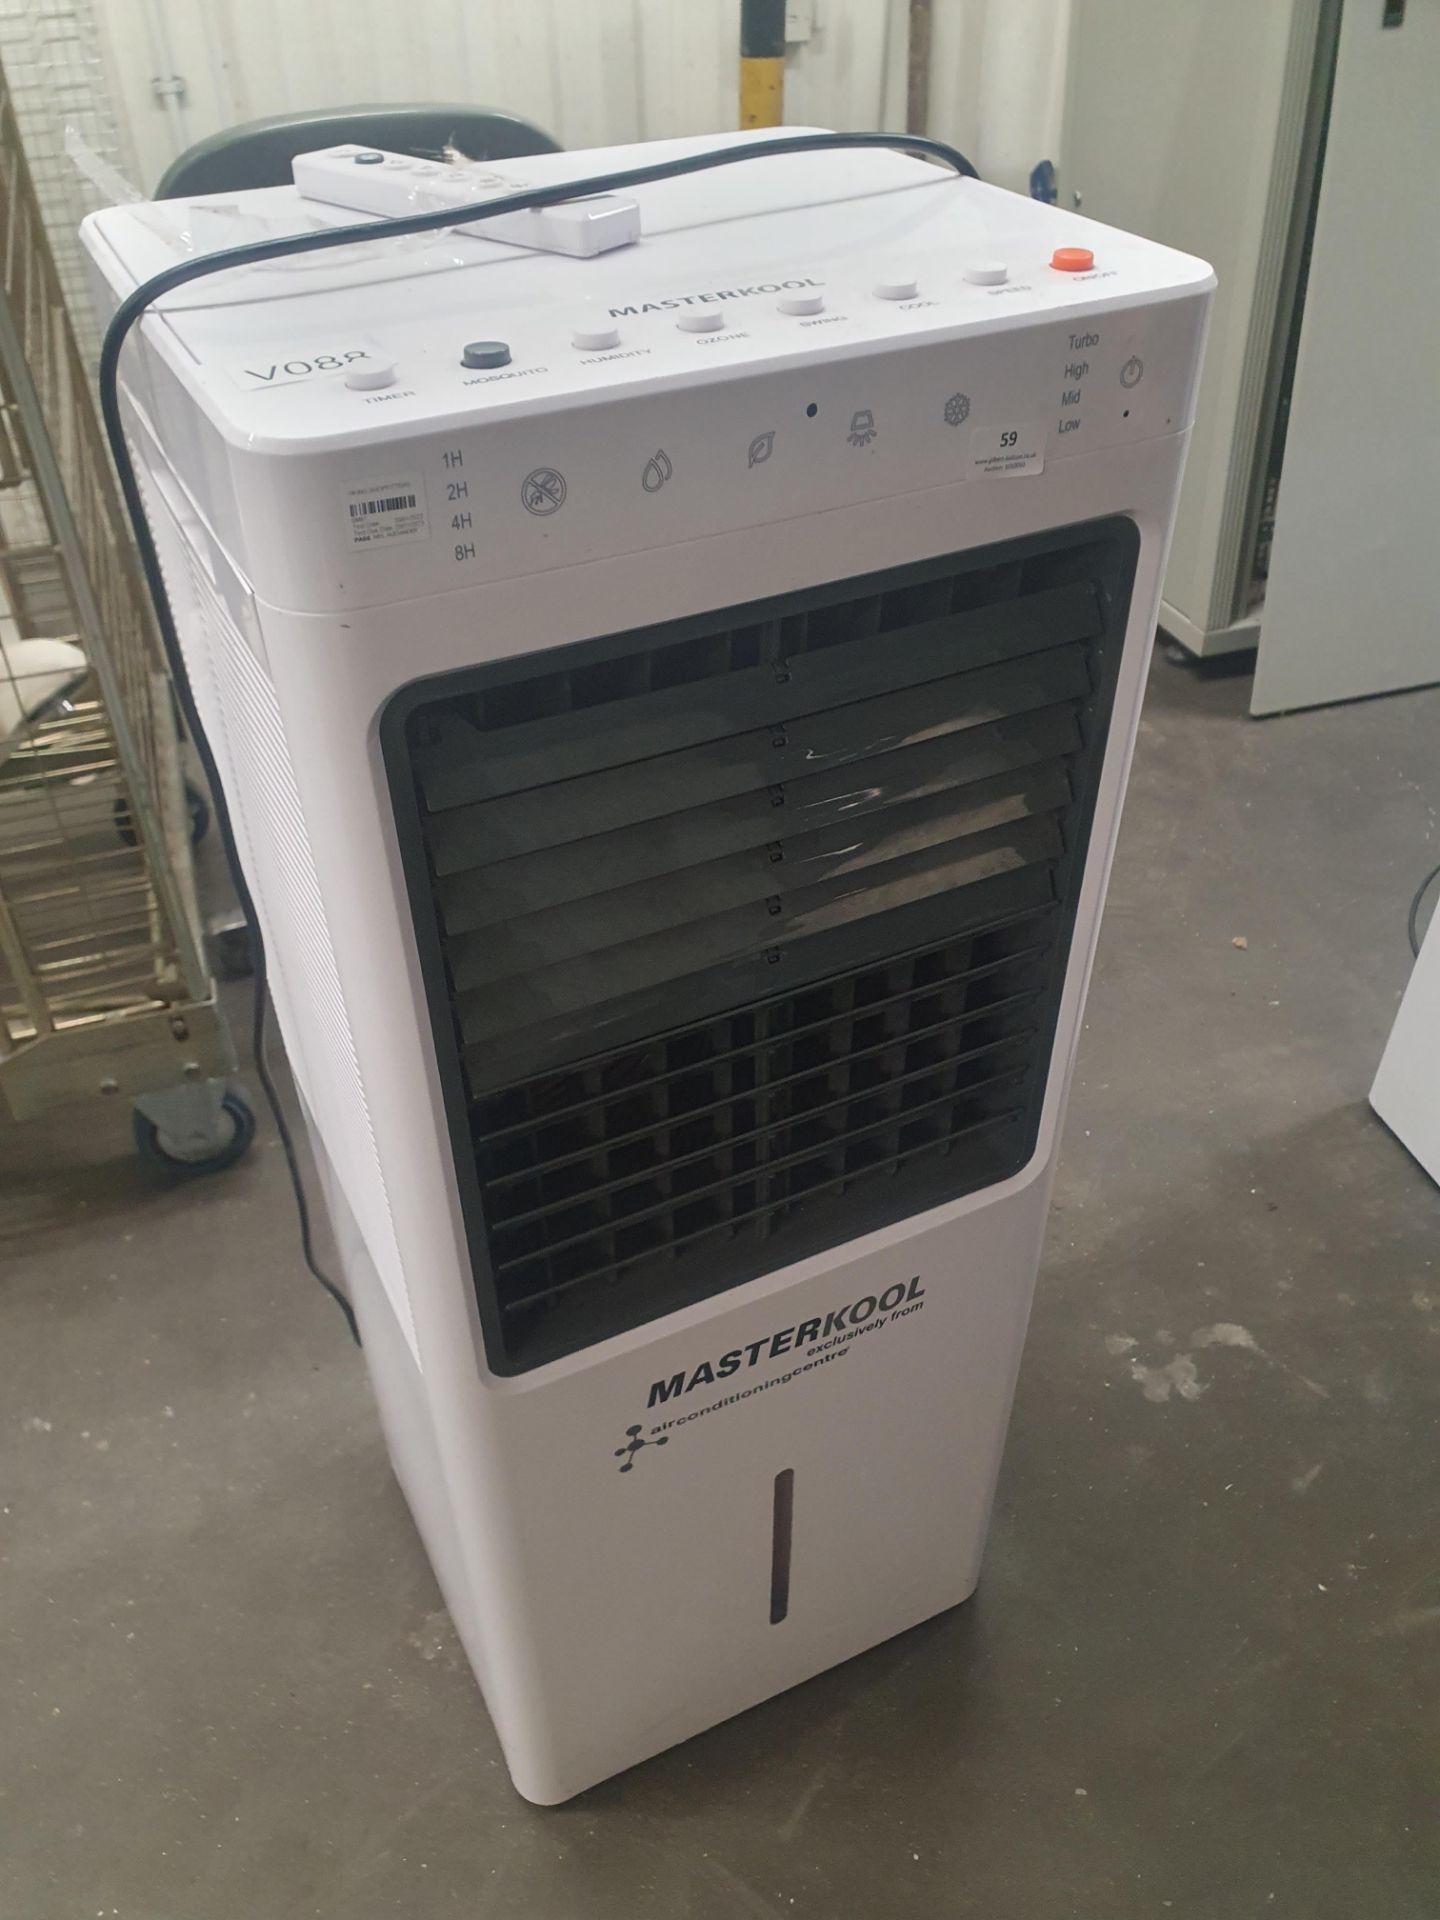 * Masterkool ikool-50plus air conditioning centre - evoporative cooler